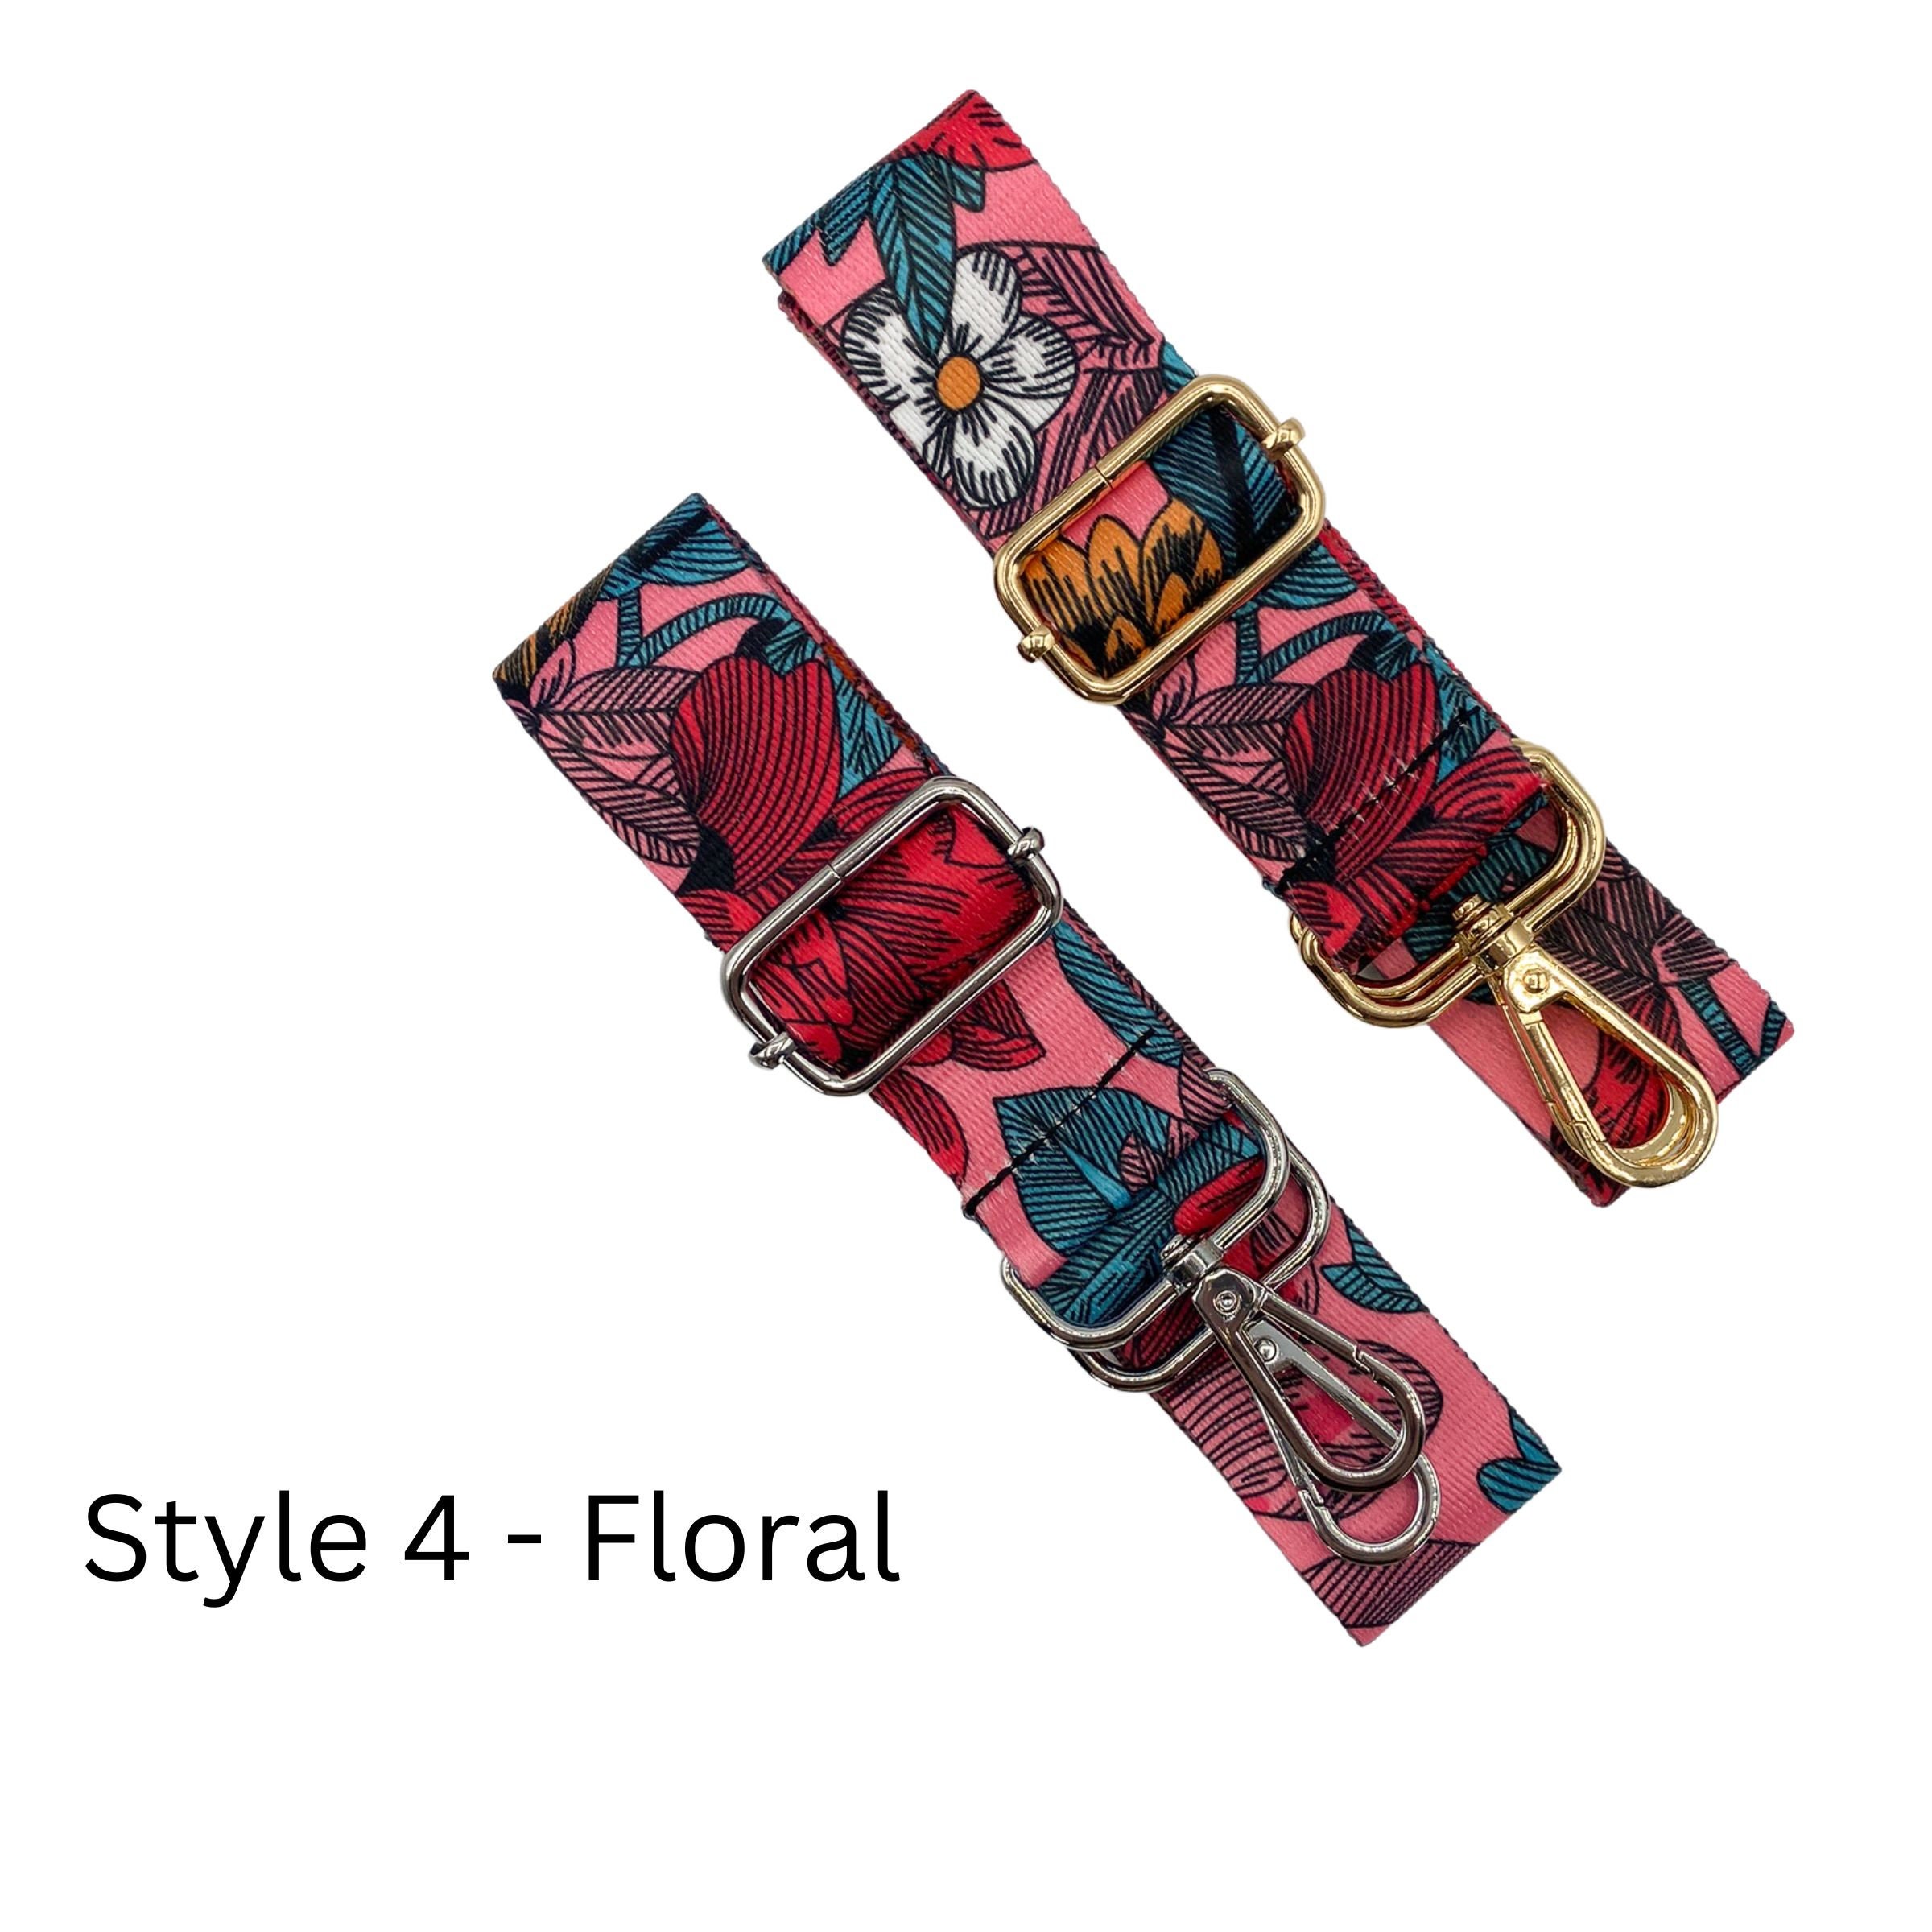 Clearance-1 1/2 Inch Wide Handbag Strap Guitar Strap Purse Strap Gold  Hardware Adjusts to 51 Length STYLE 9 